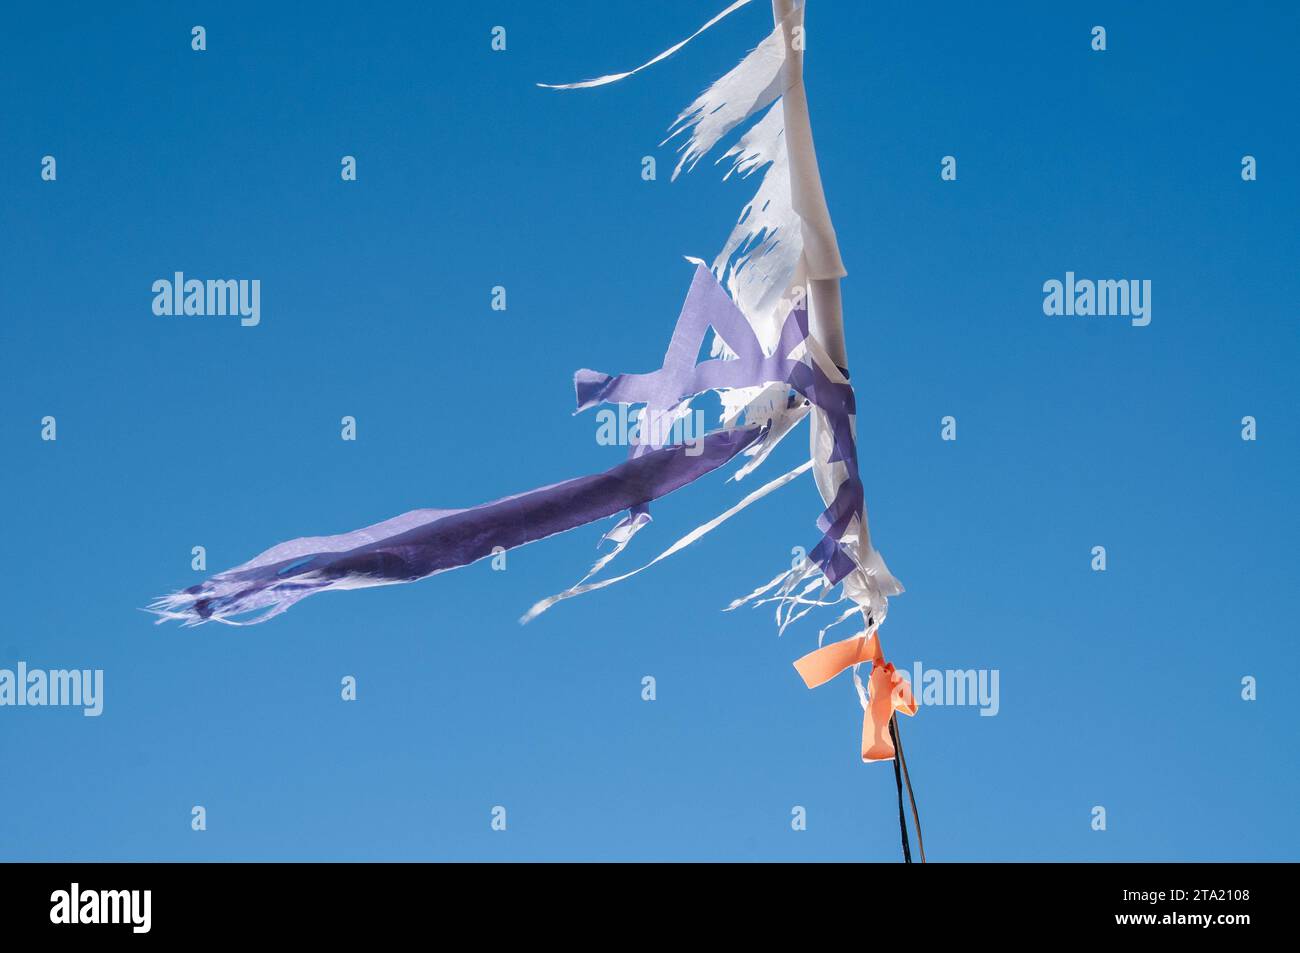 Worn and weathered, torn and tattered remnants of an Israeli flag flutters in the breeze on sunny day. Stock Photo